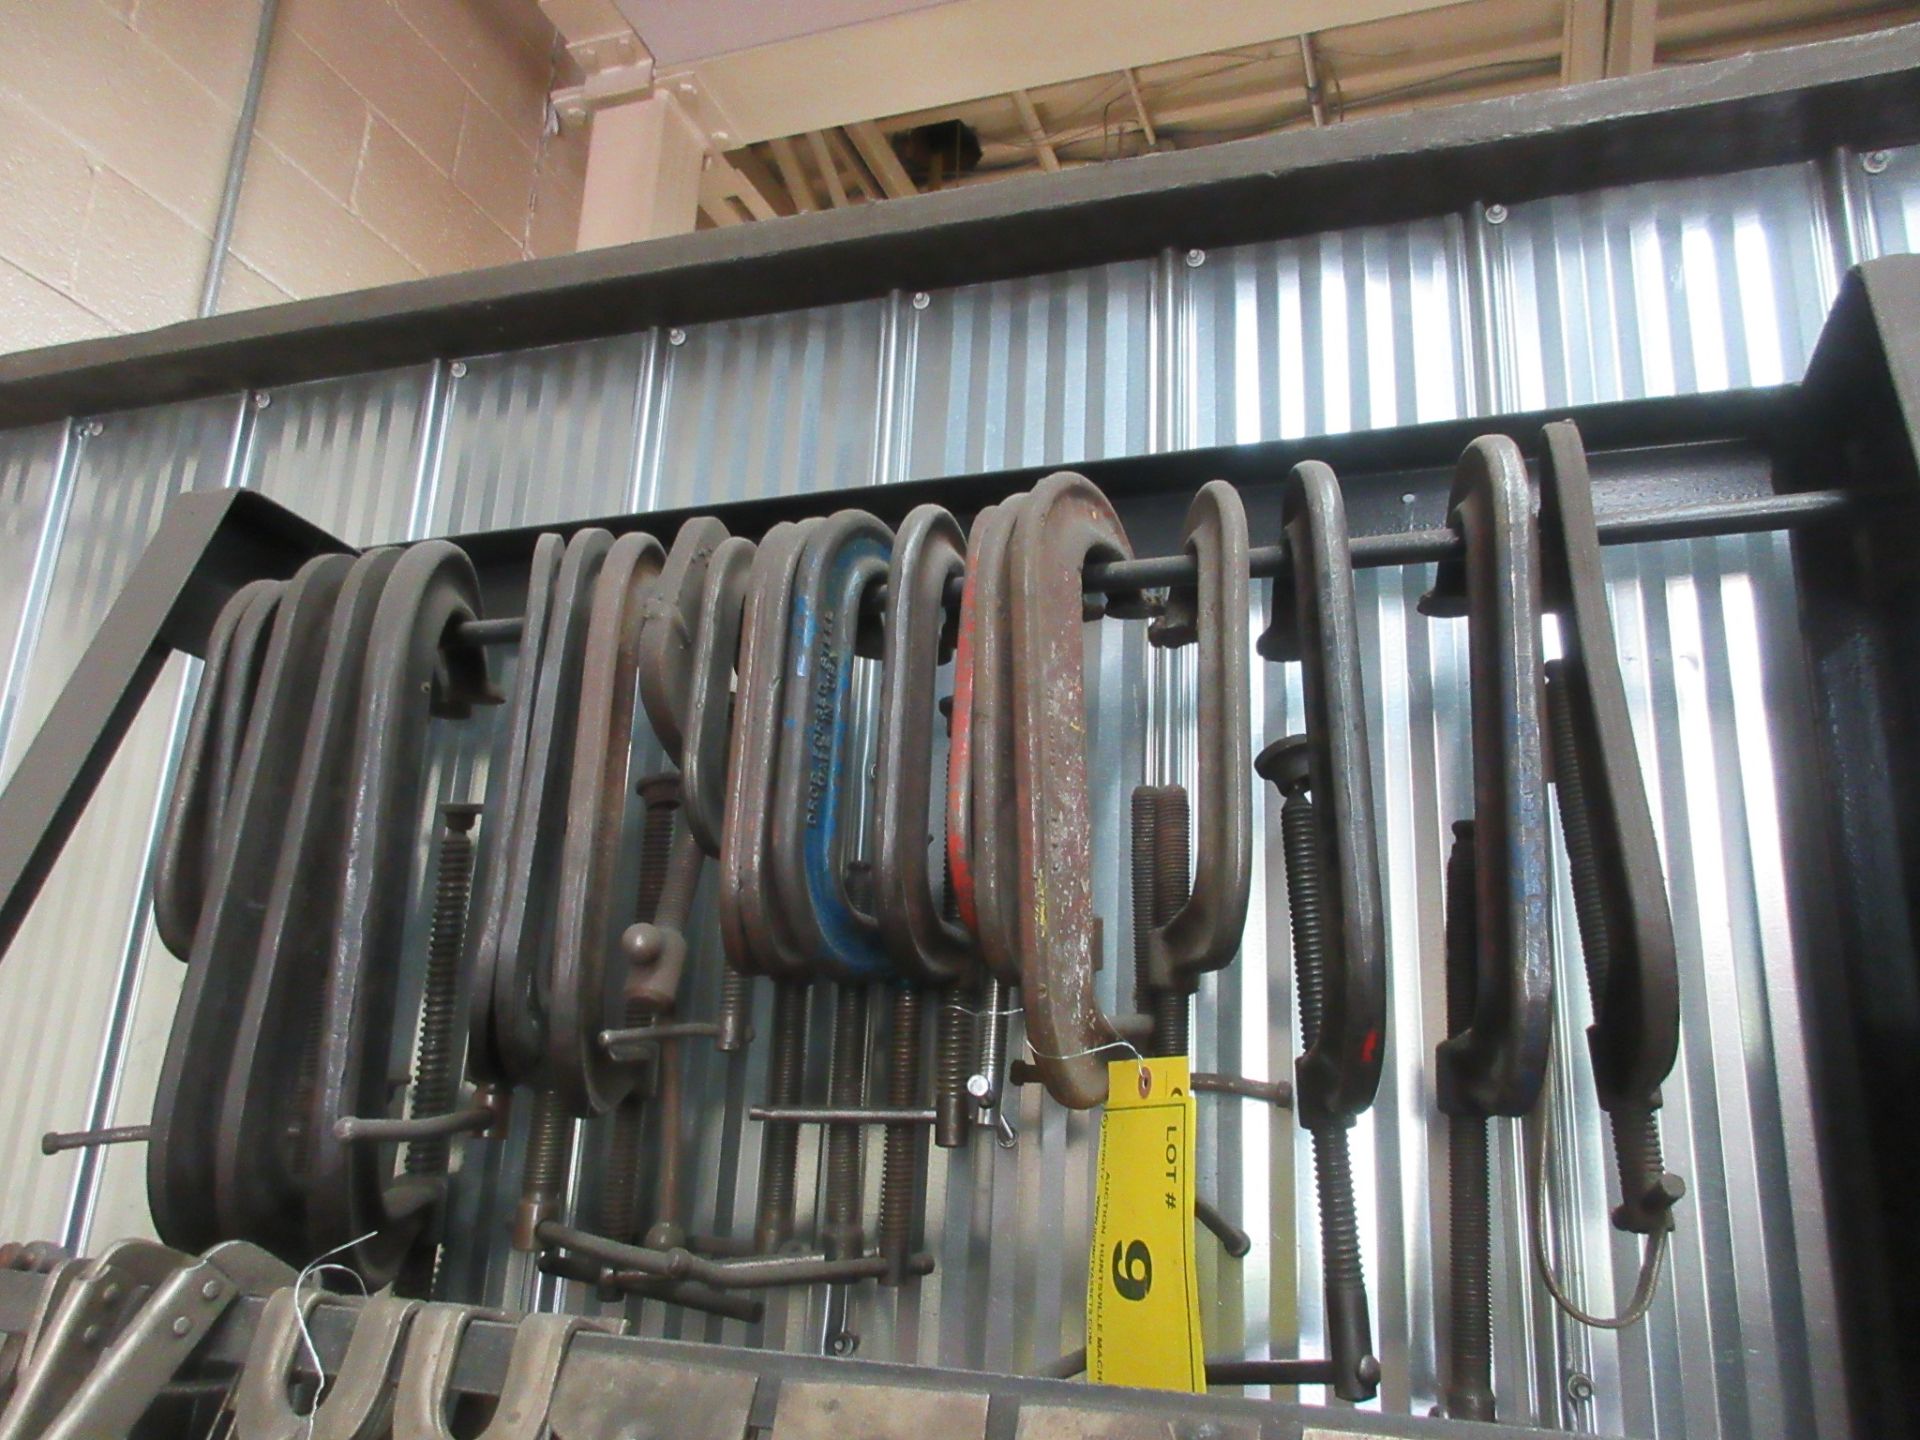 LOT OF APPROX. (21) LARGE C-CLAMPS HANGING FROM TOP ROW OF RACK (NO RACK)